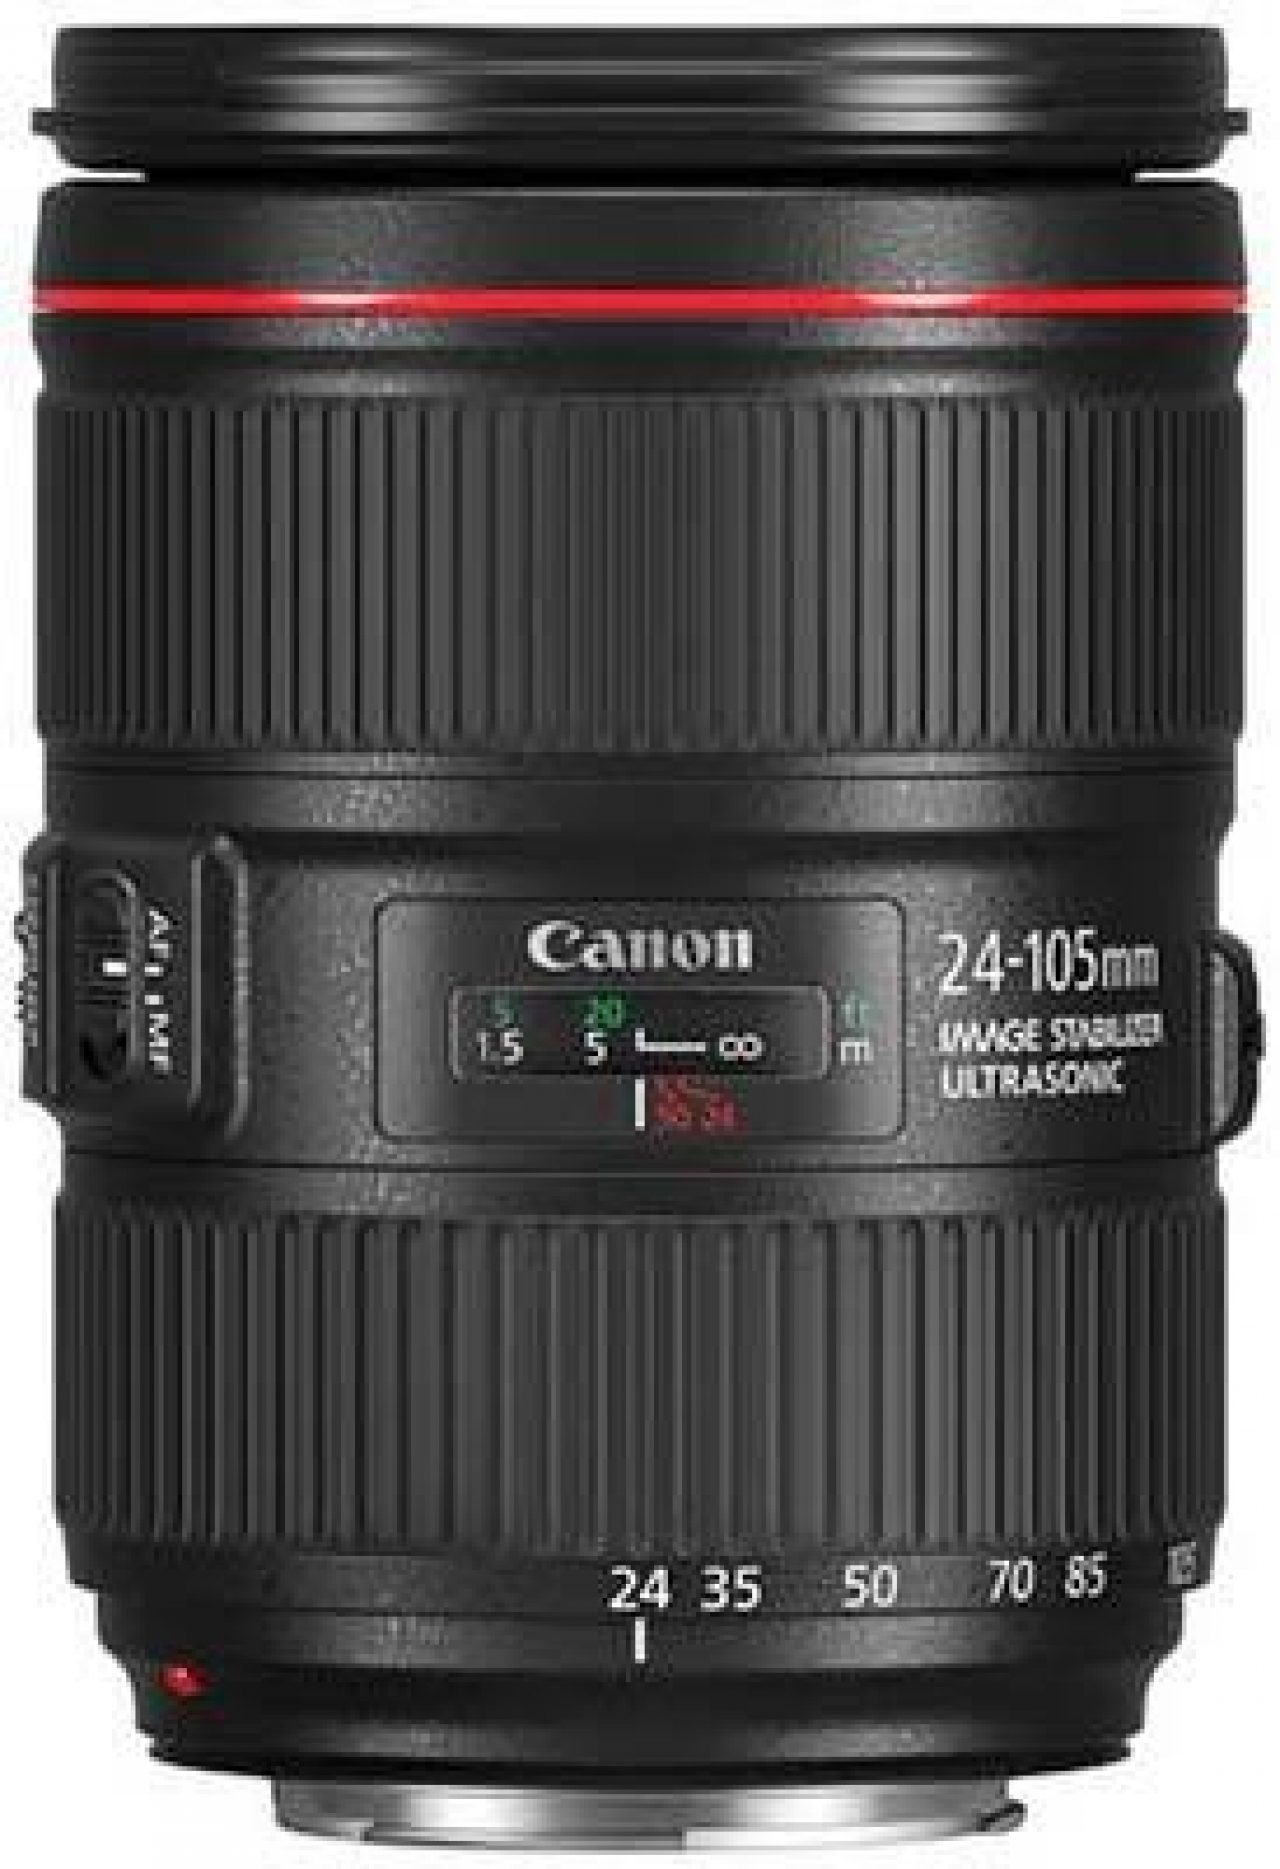 Canon EF 24-105mm f/4L IS II USM Review - Rivals | Photography Blog